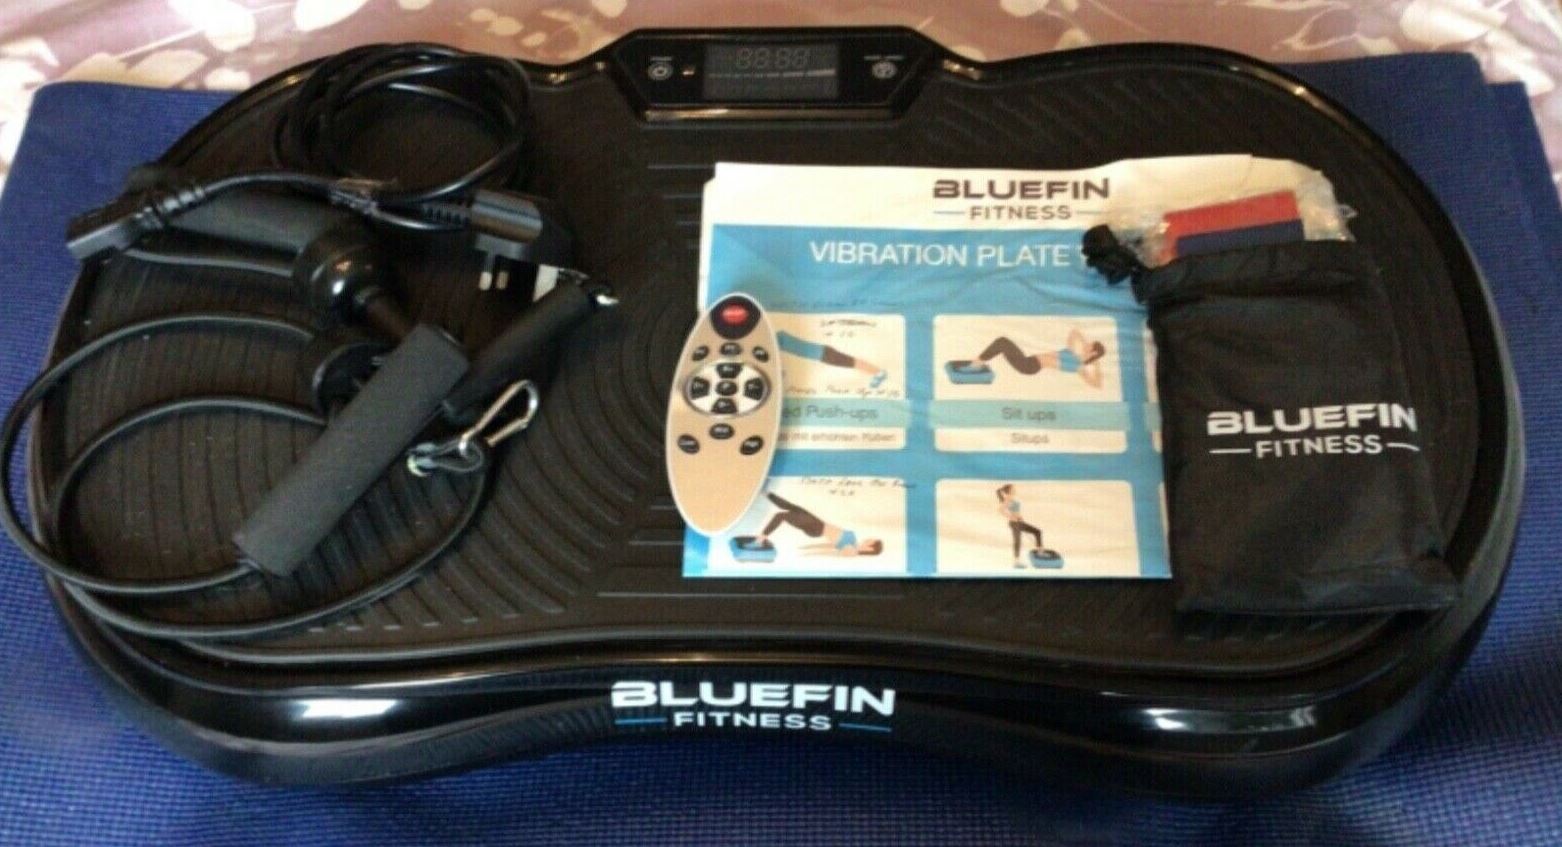 Bluefin Fitness Ultra Slim Vibration Plate in use 2